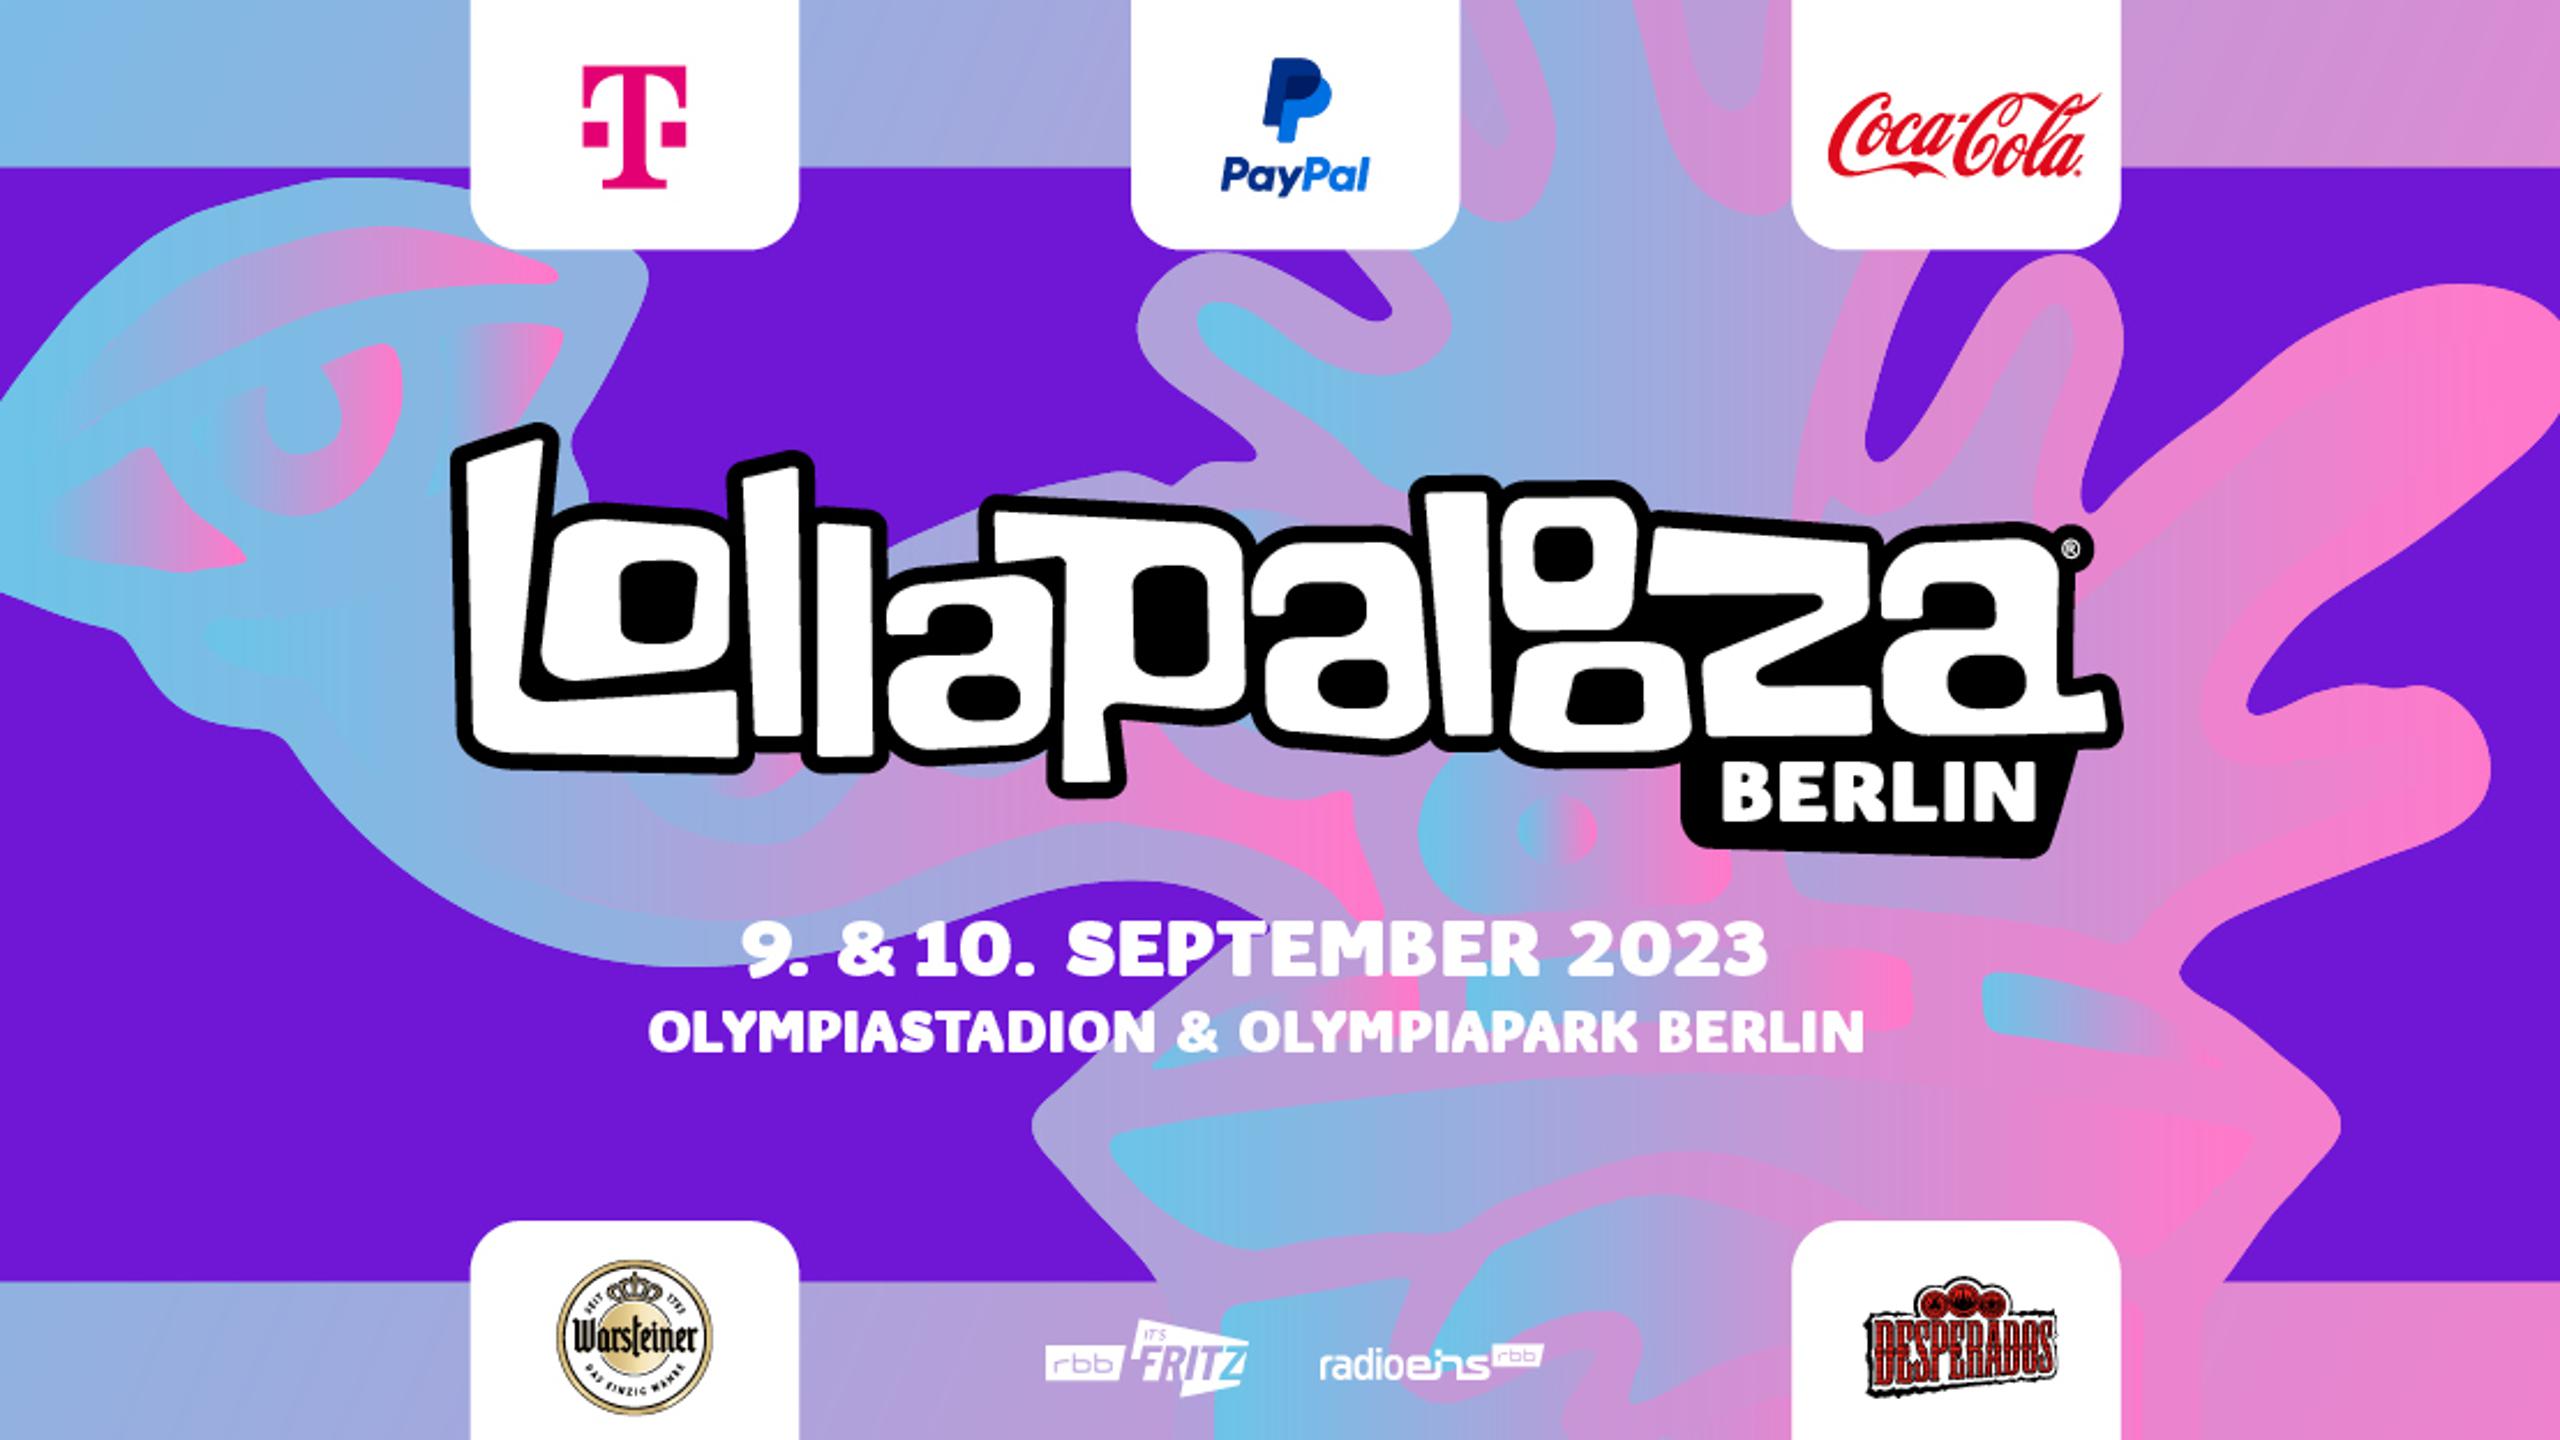 Lollapalooza Berlin 2023. Tickets, lineup, bands for Lollapalooza